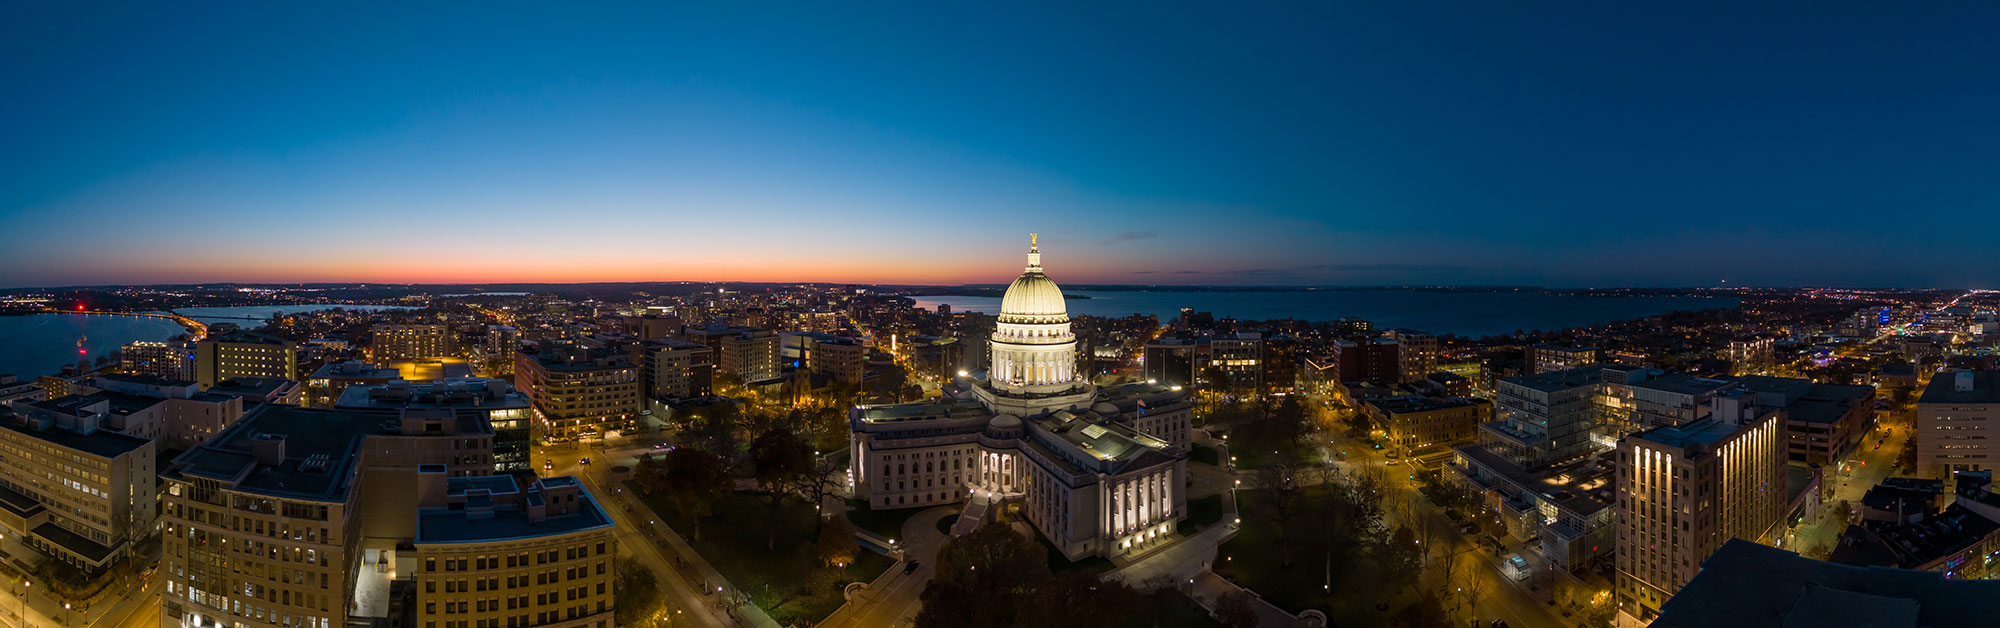 State Capitol in downtown madison, Wis., at night